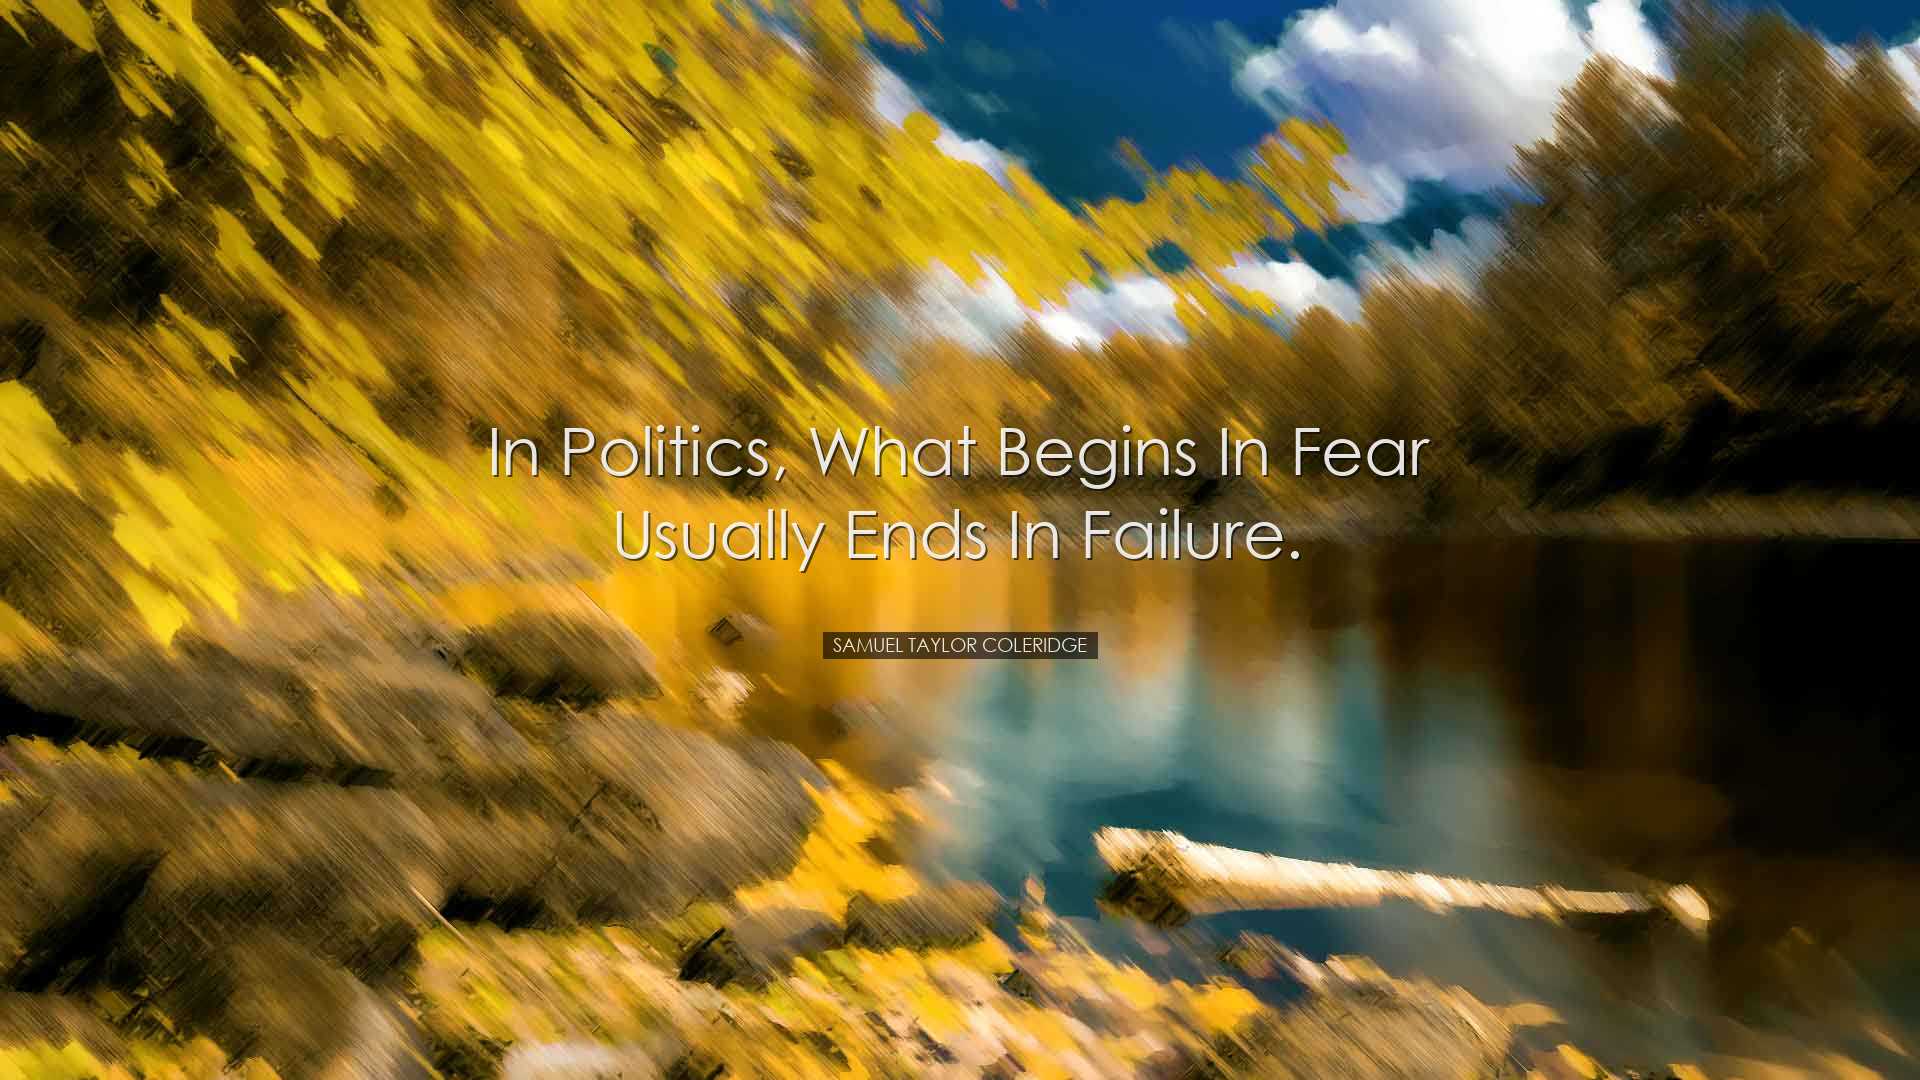 In politics, what begins in fear usually ends in failure. - Samuel